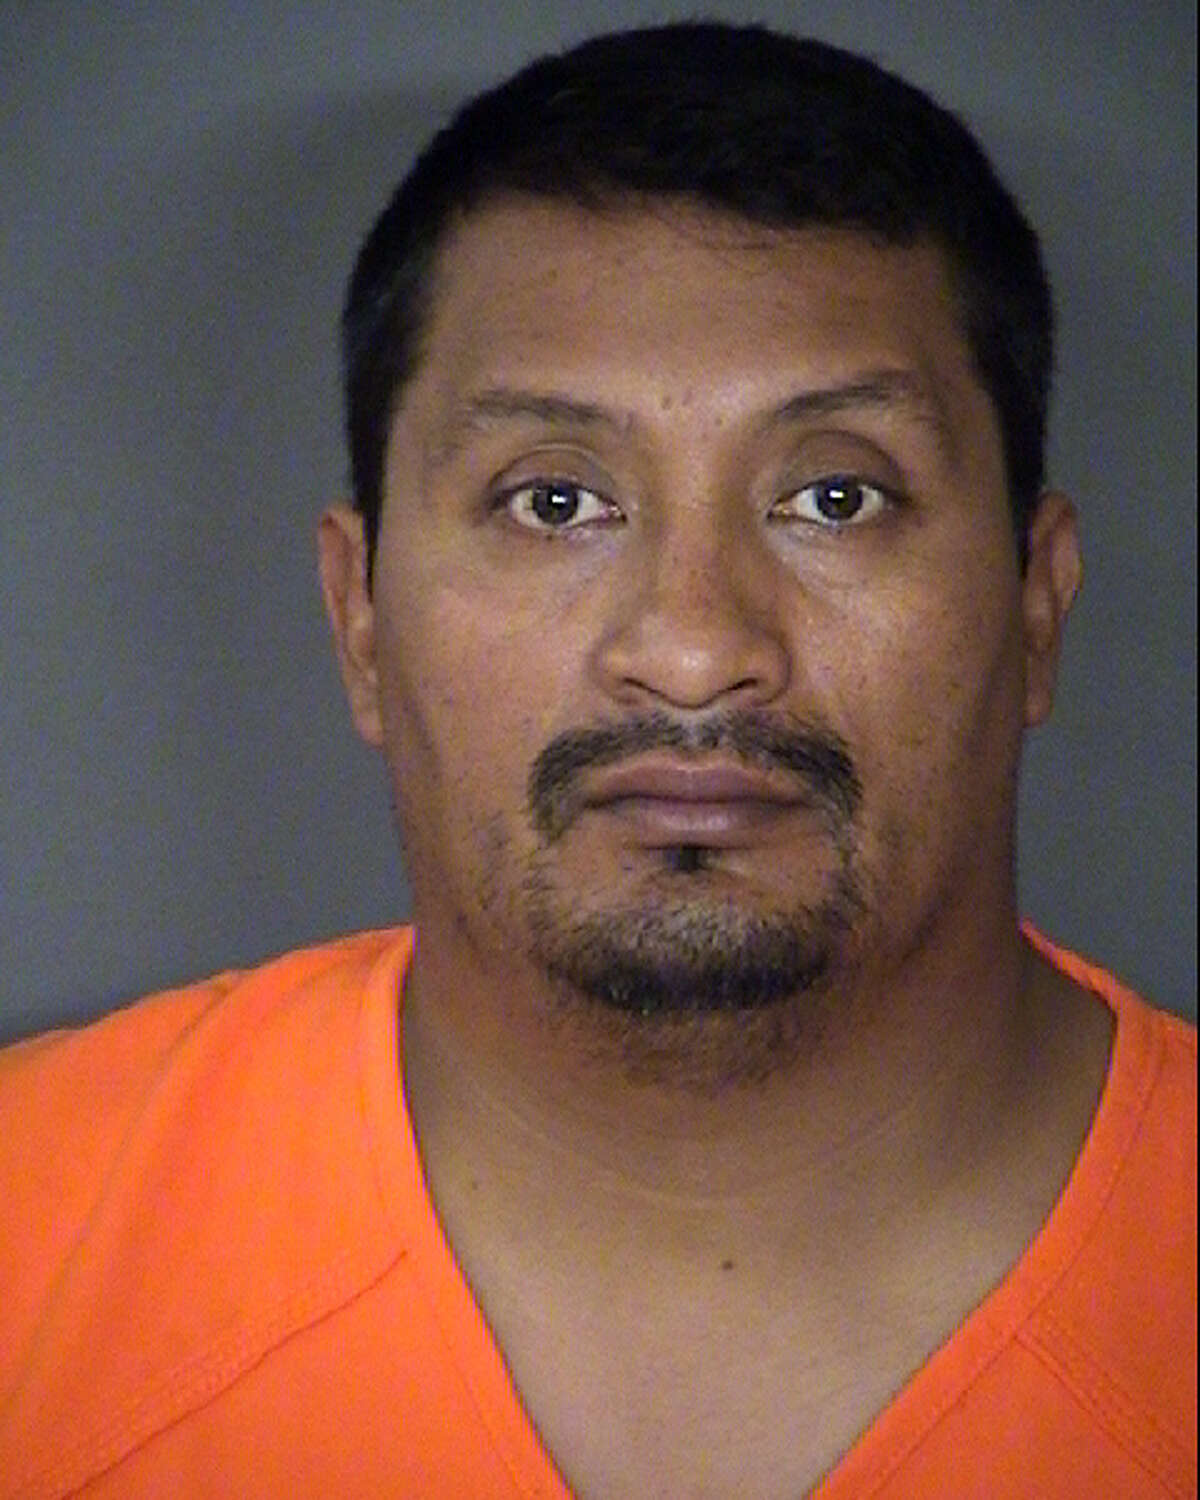 Gabriel Vazquez, 40, was arrested Jan. 15, 2017, on a second-degree felony charge of sexual assault.